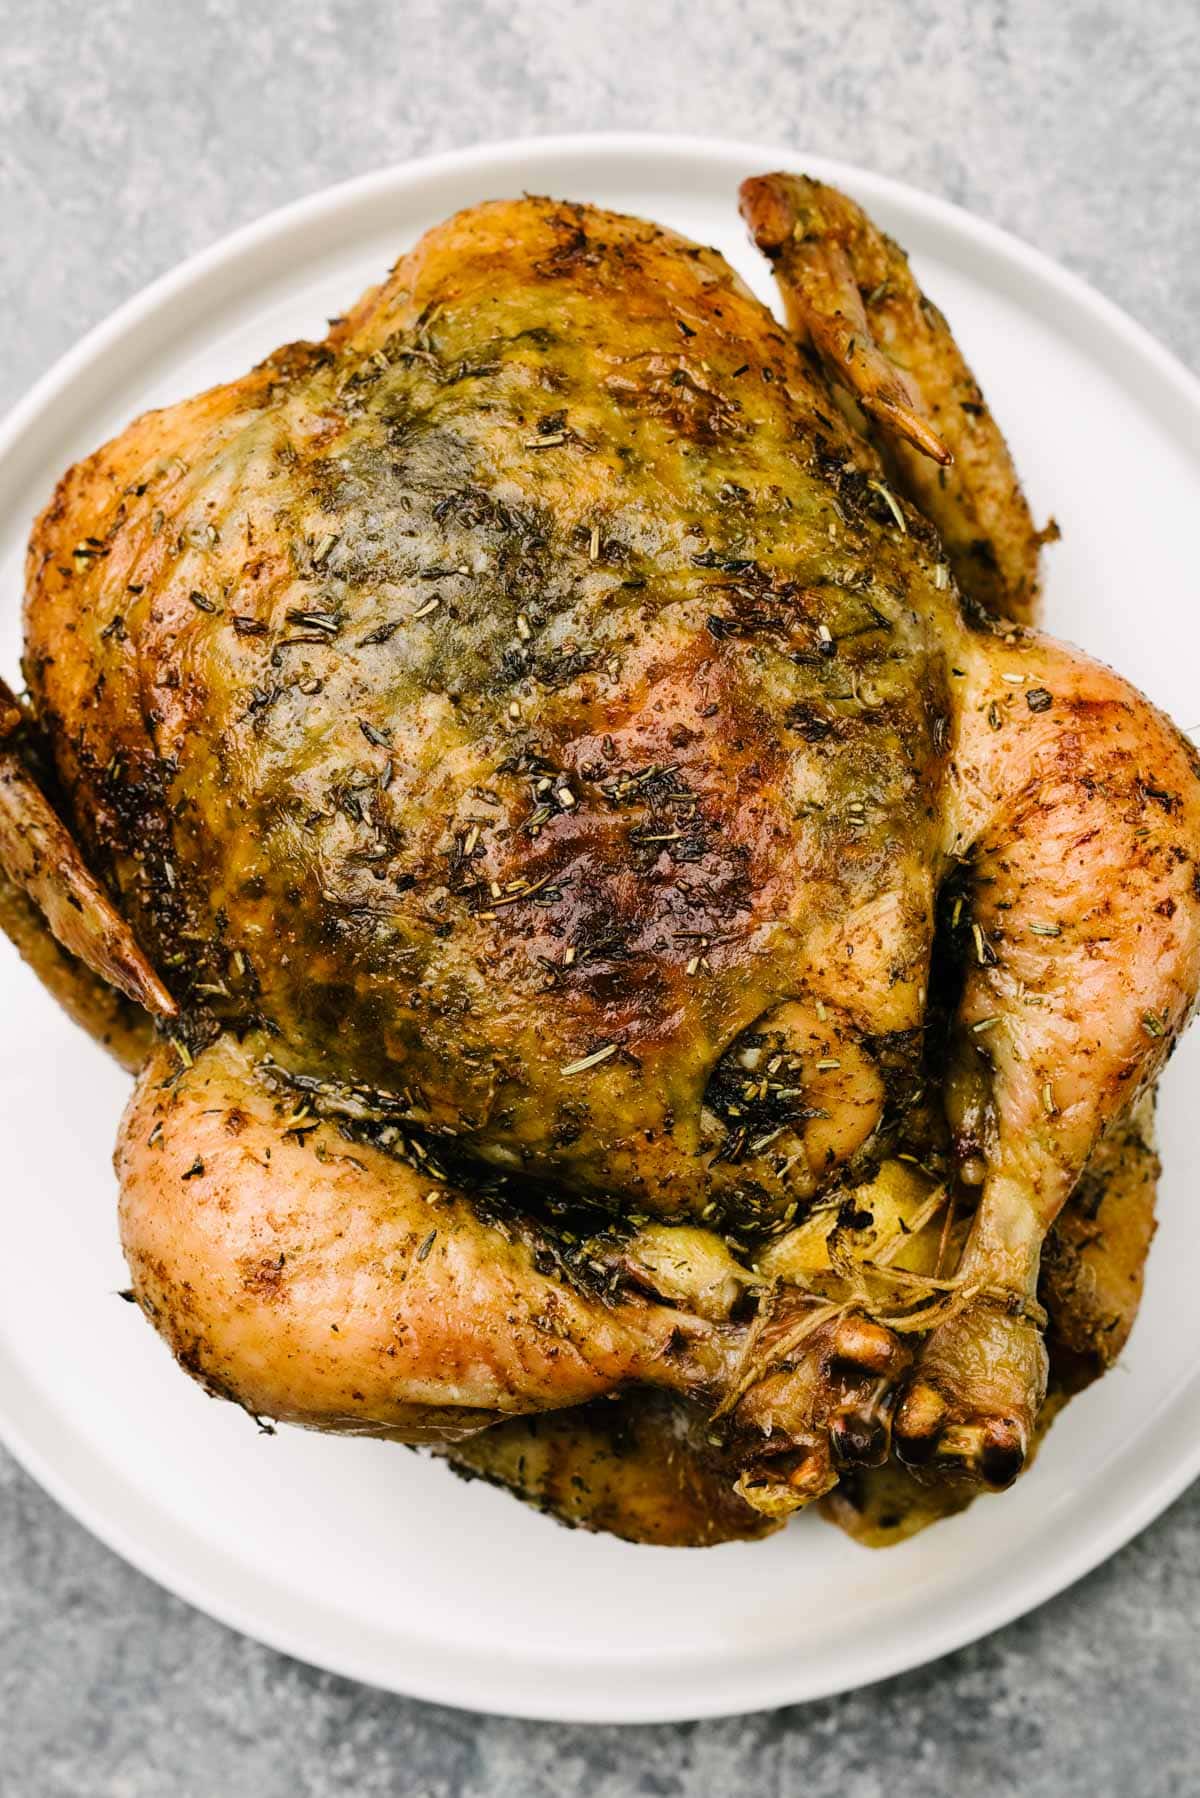 An herb roasted chicken fresh from the oven with golden brown skin on a white plate.